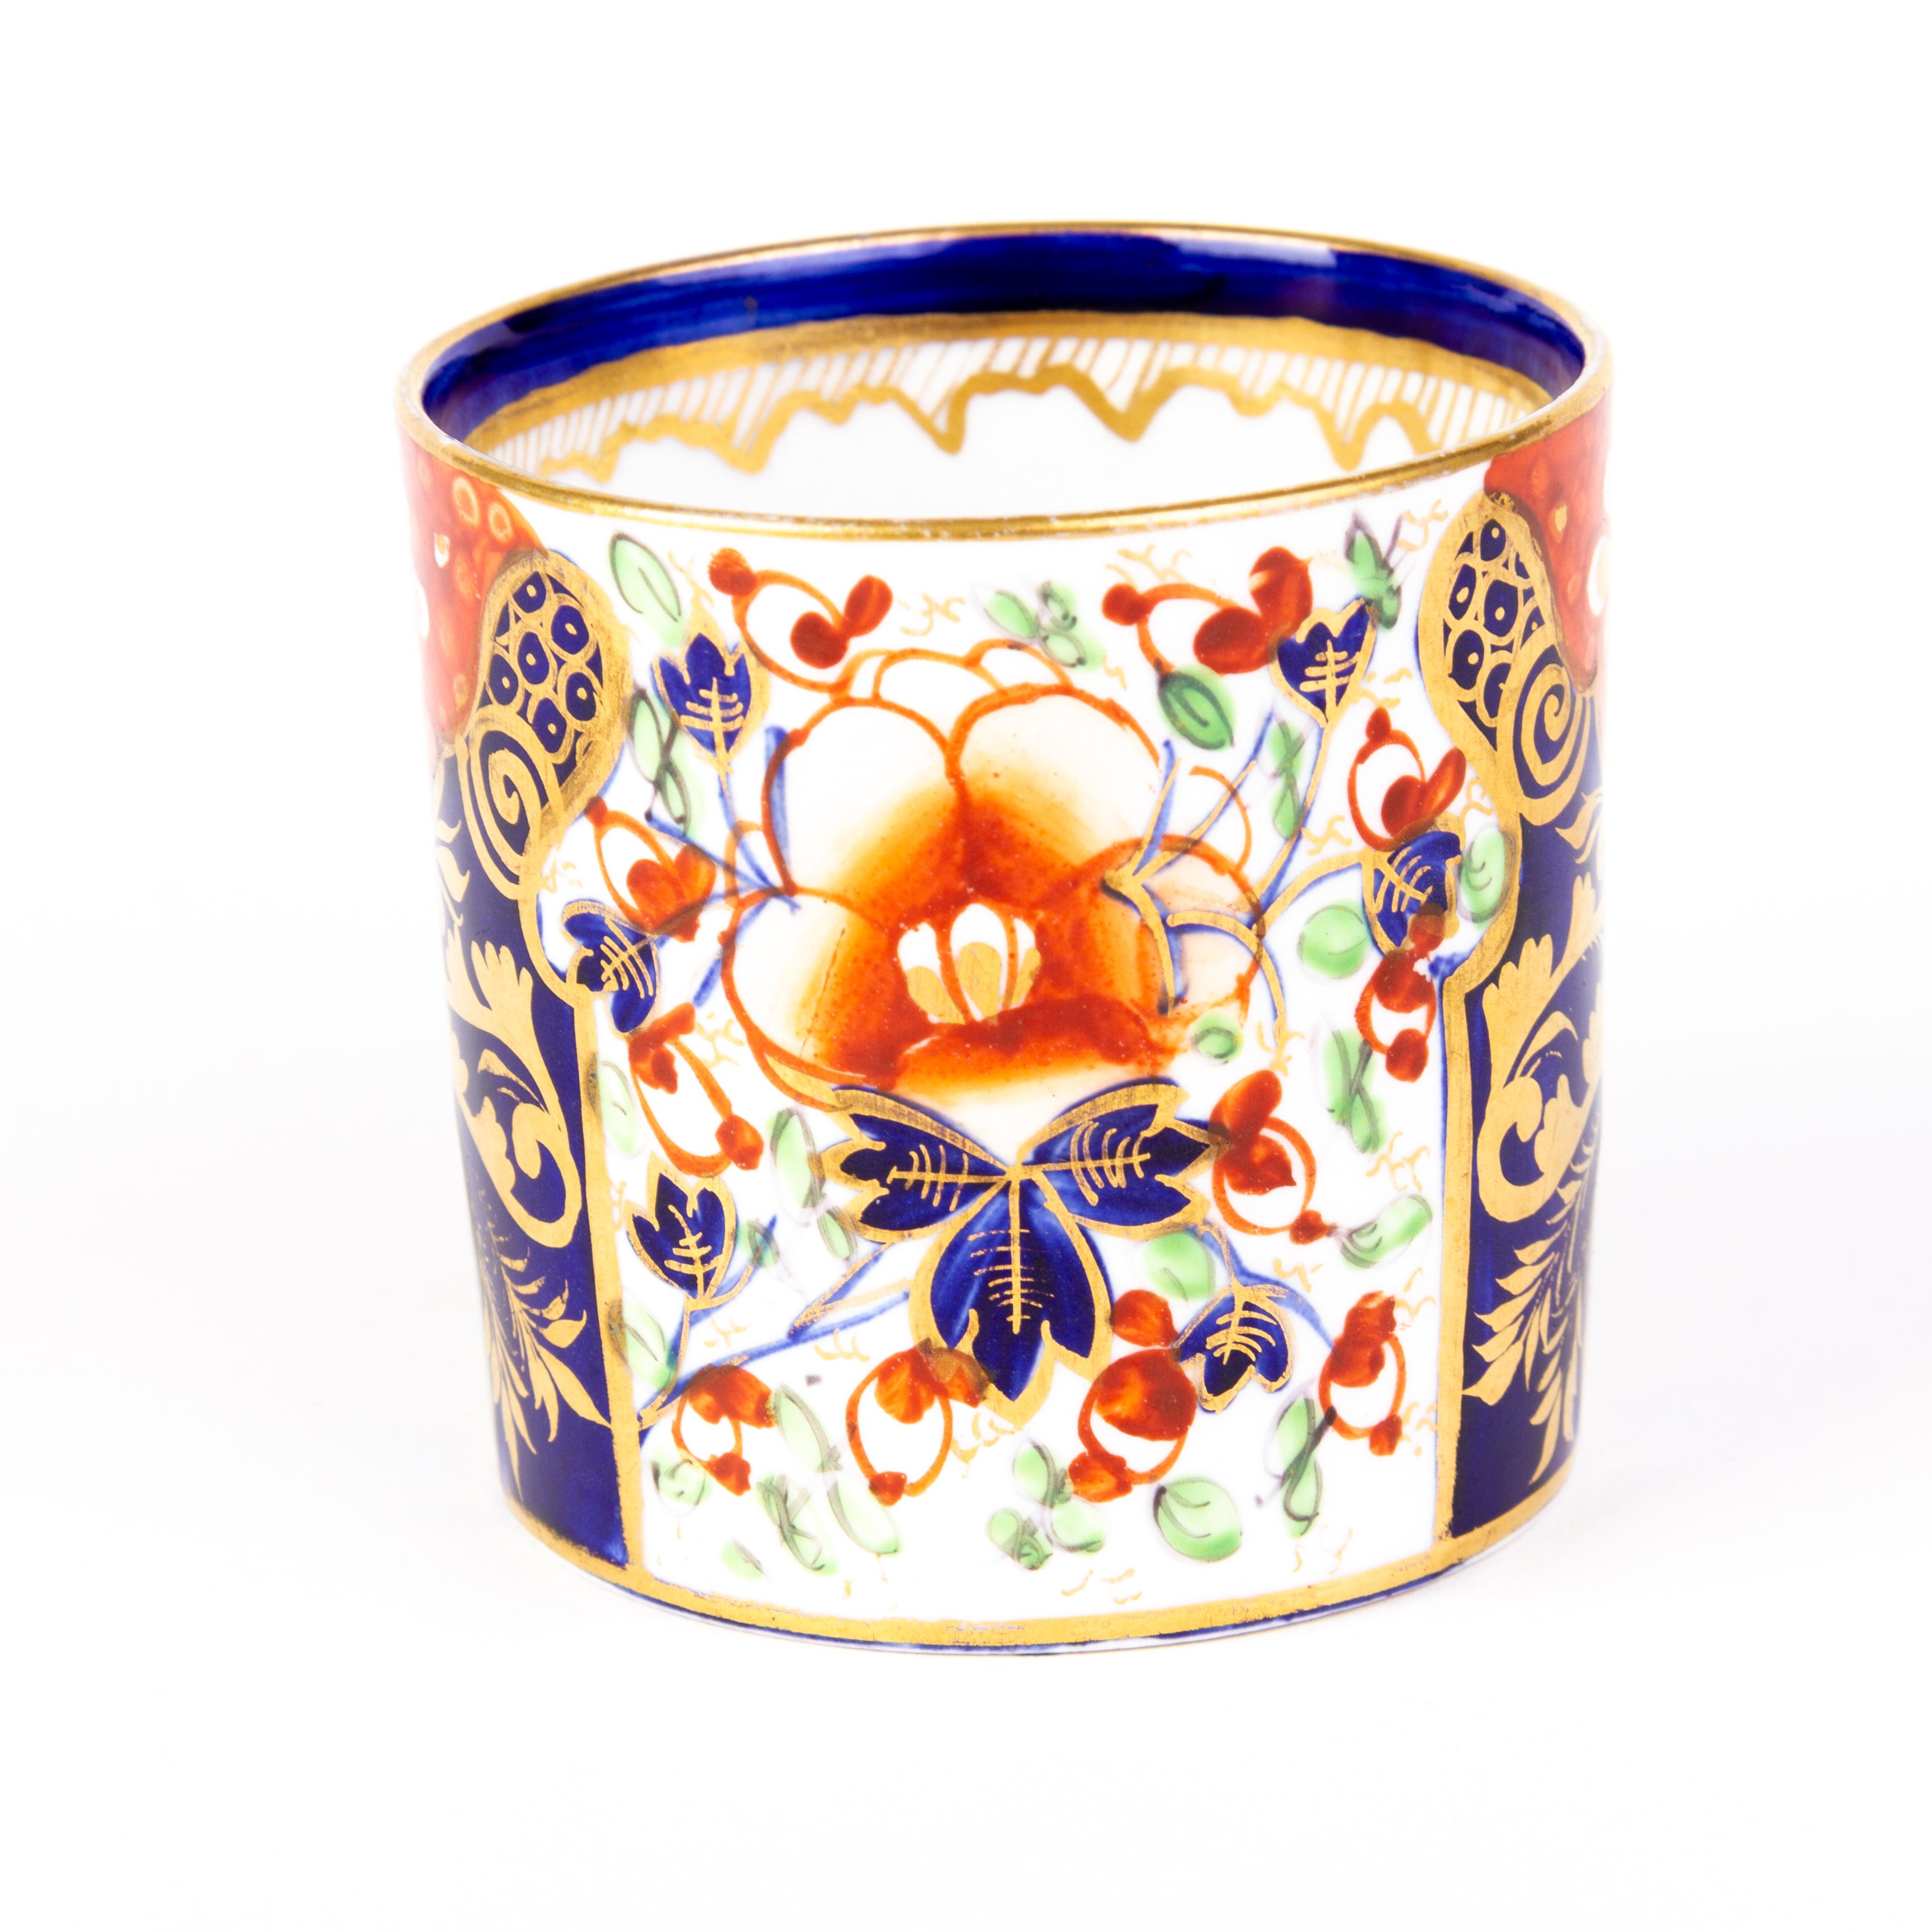 English Derby Porcelain Georgian Imari Bamboo Stemmed Coffee Can ca. 1805
Good condition overall, as seen.
From a private collection.
Free international shipping.